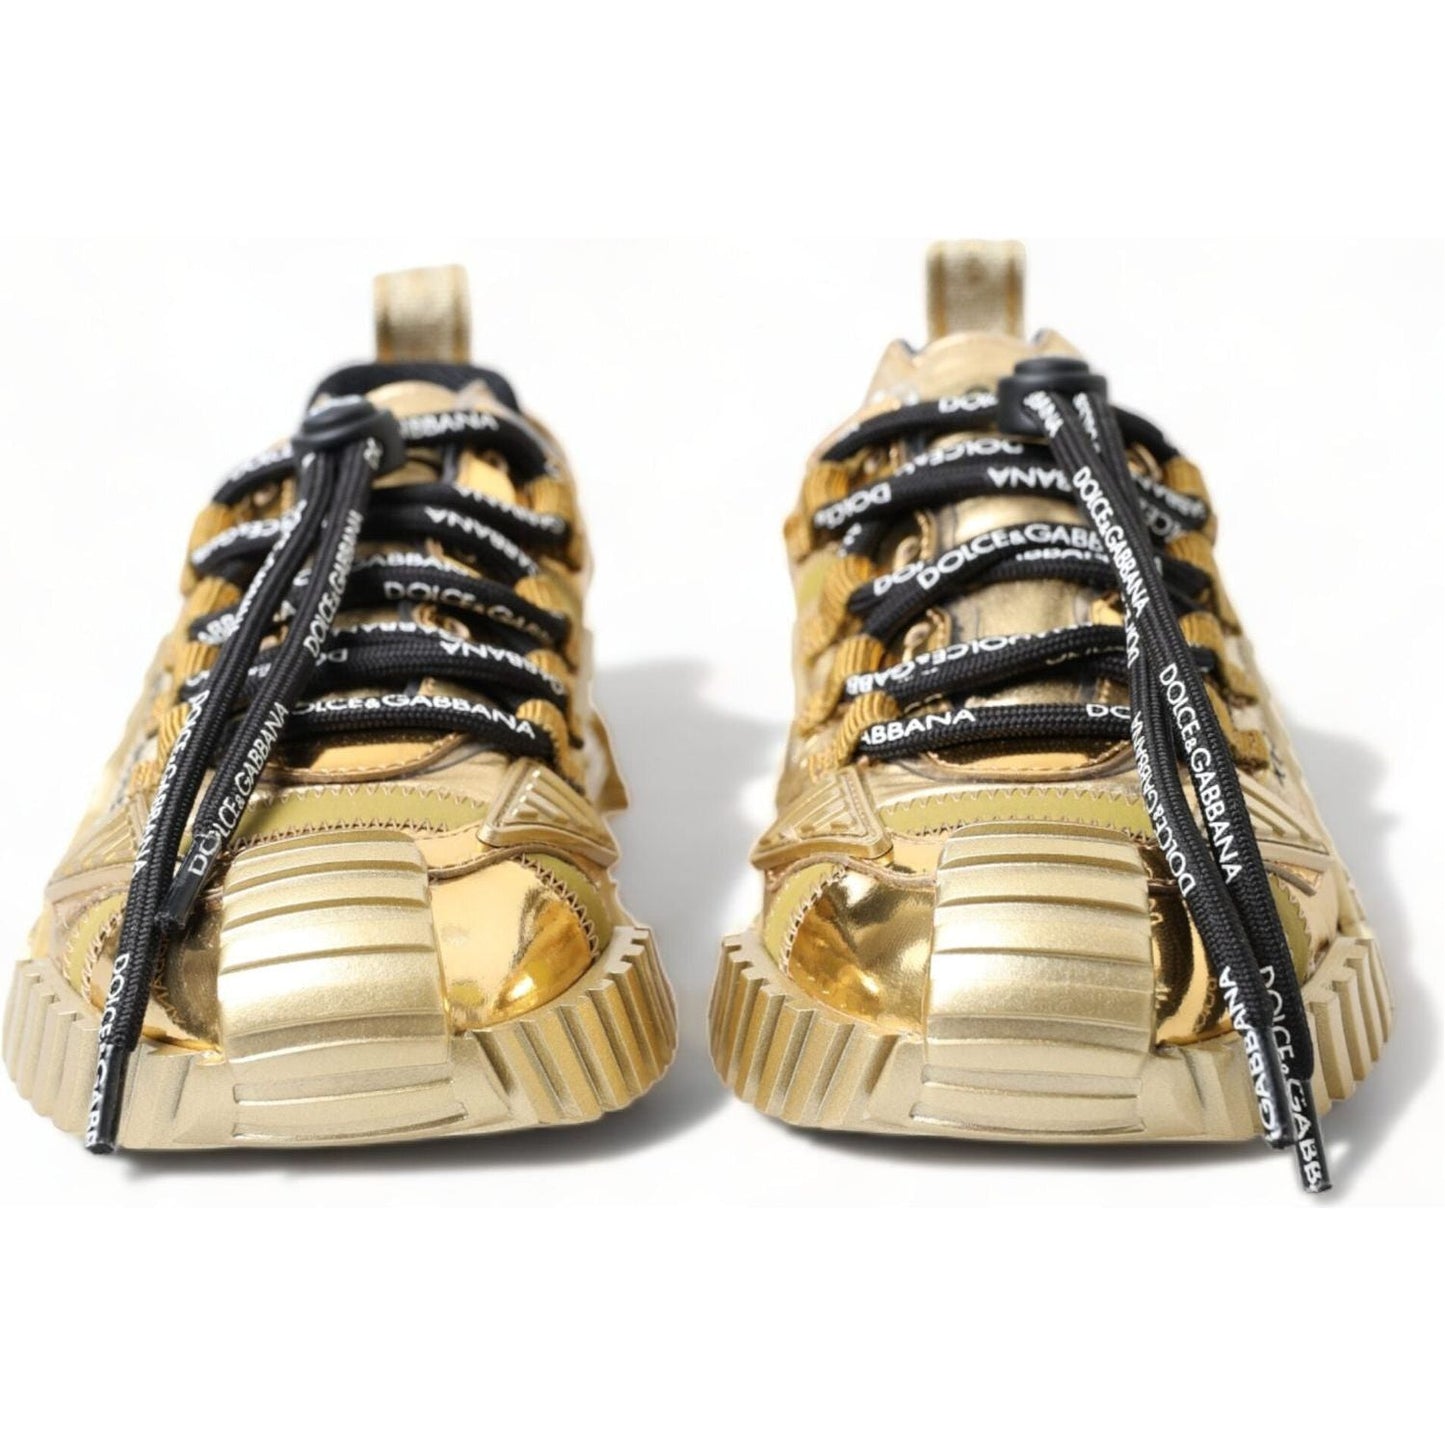 Dolce & Gabbana D&G Gleaming Gold-Toned Luxury Sneakers metallic-gold-ns1-low-top-sneakers-shoes 465A2188-BG-scaled-f4f03f94-464.jpg